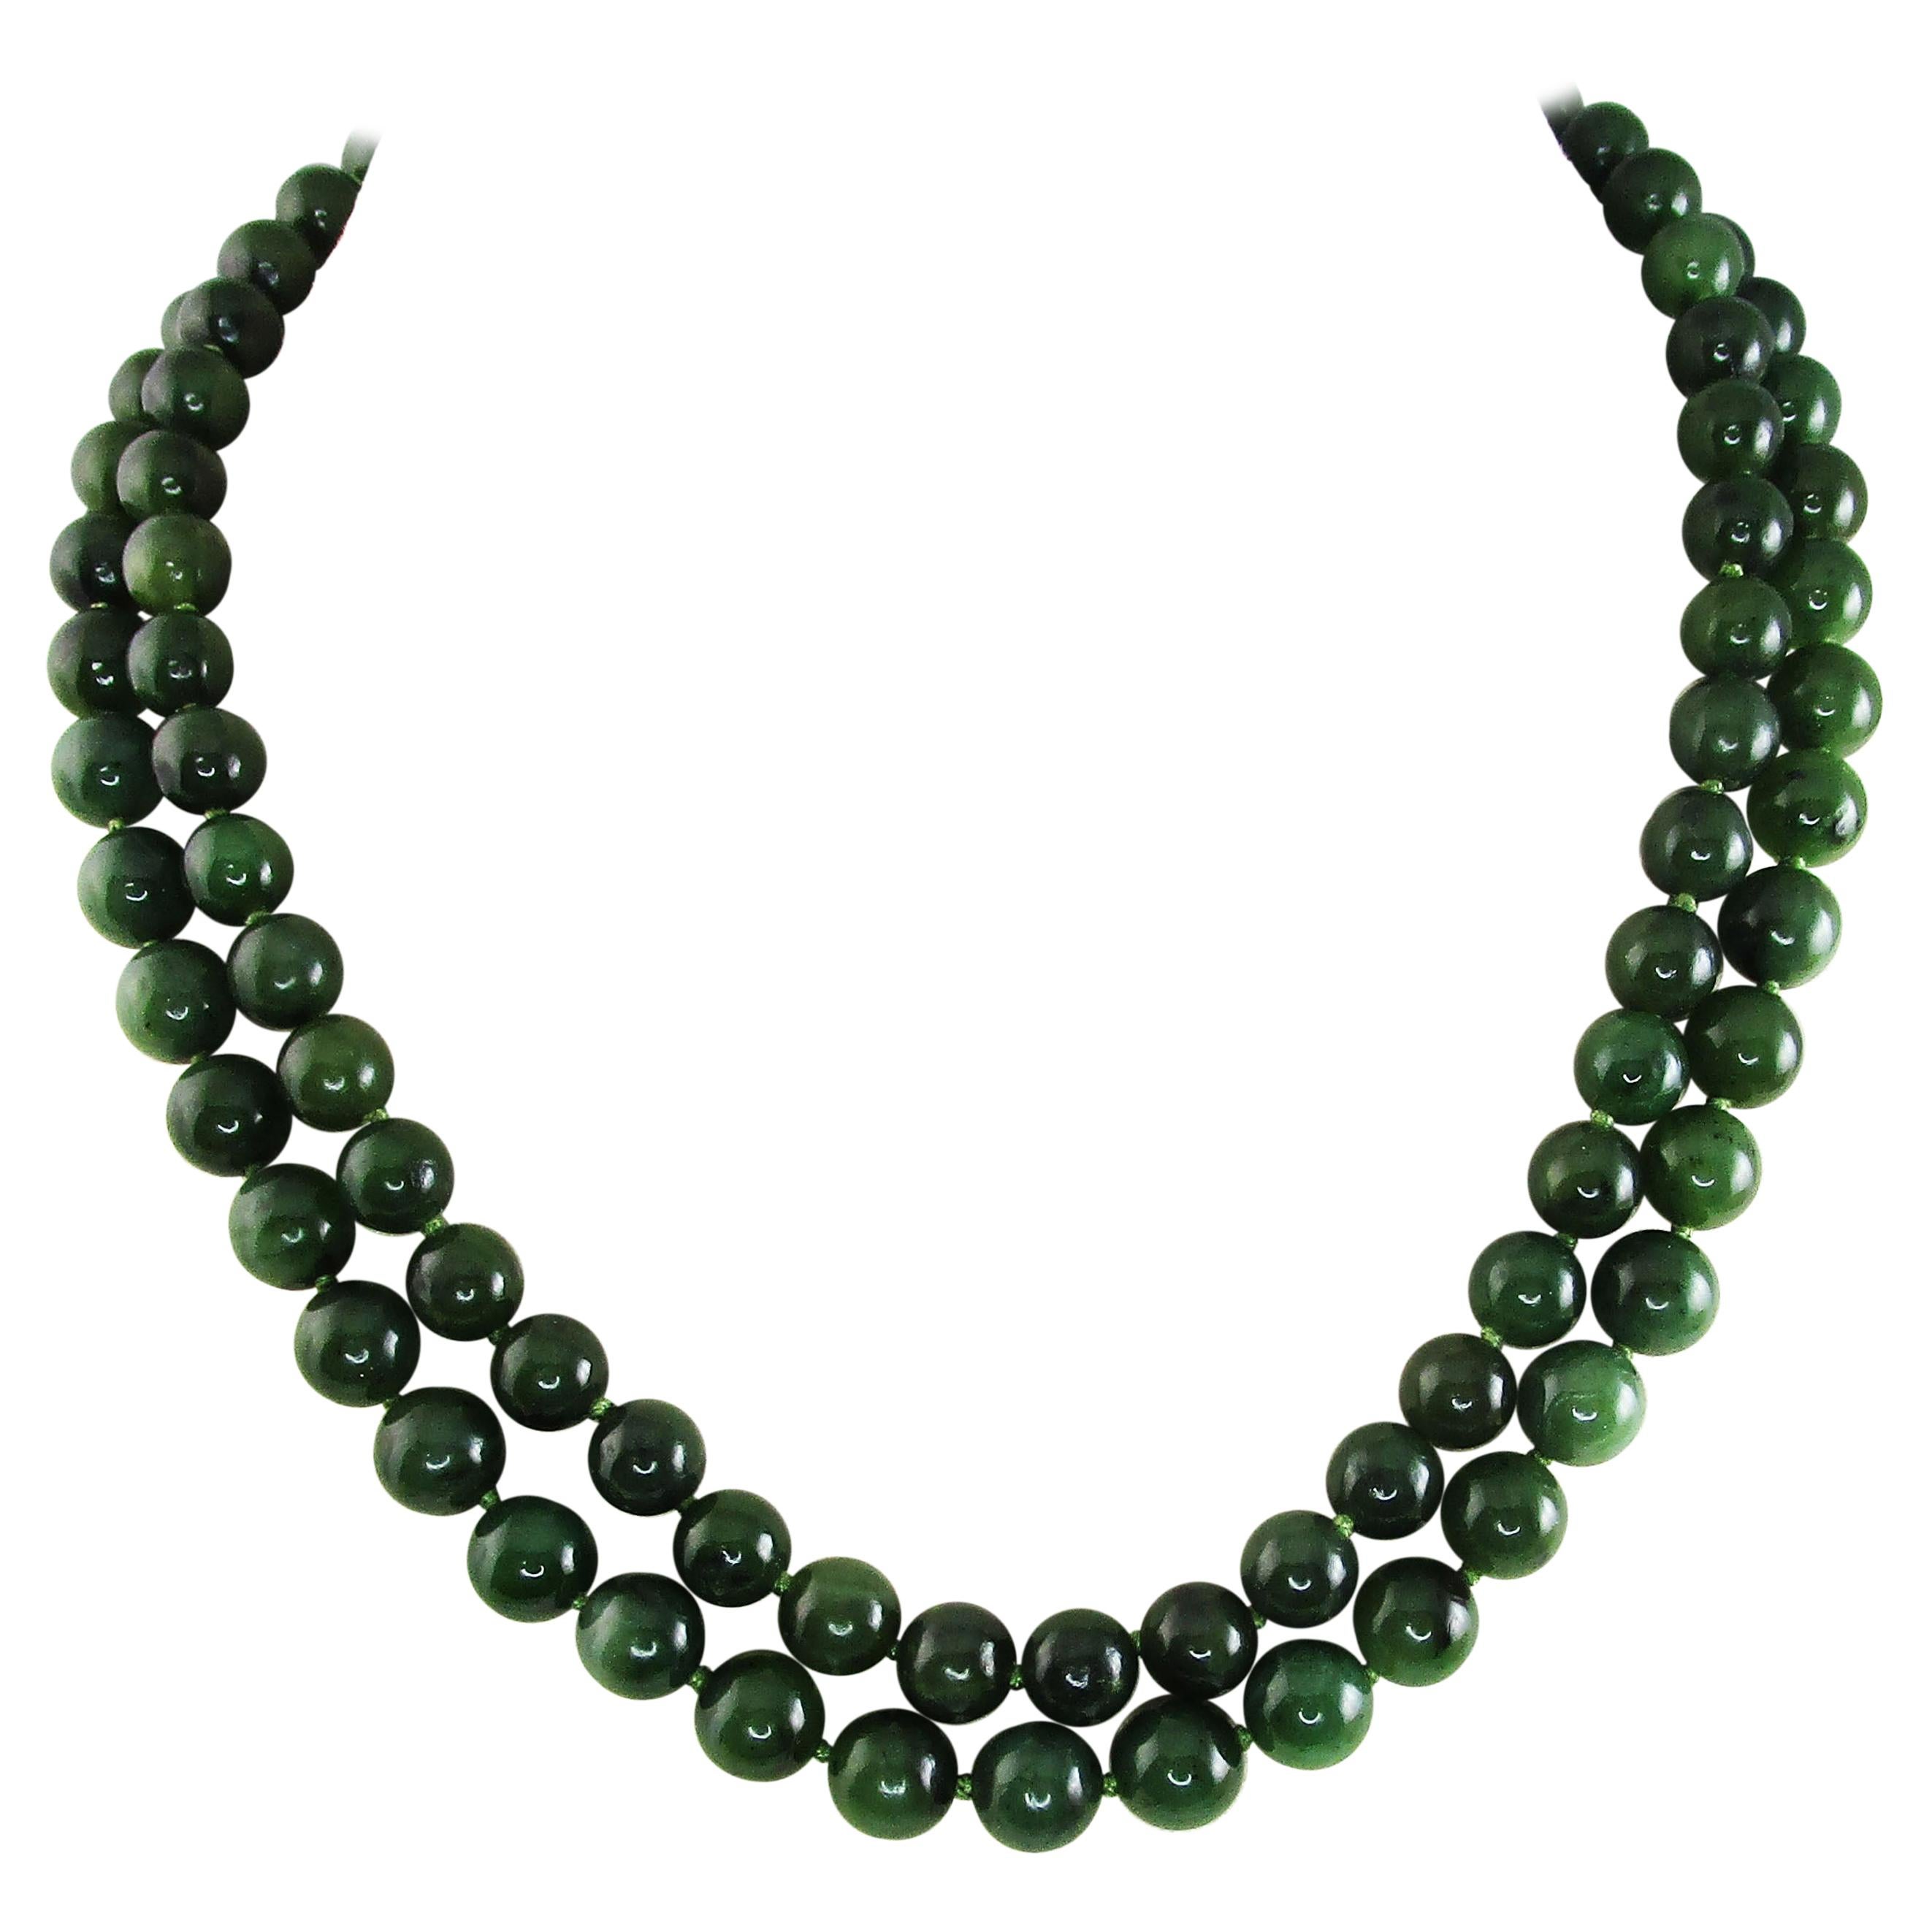 Midcentury Double Strand Jade Necklace with 14 Karat Gold Clasp